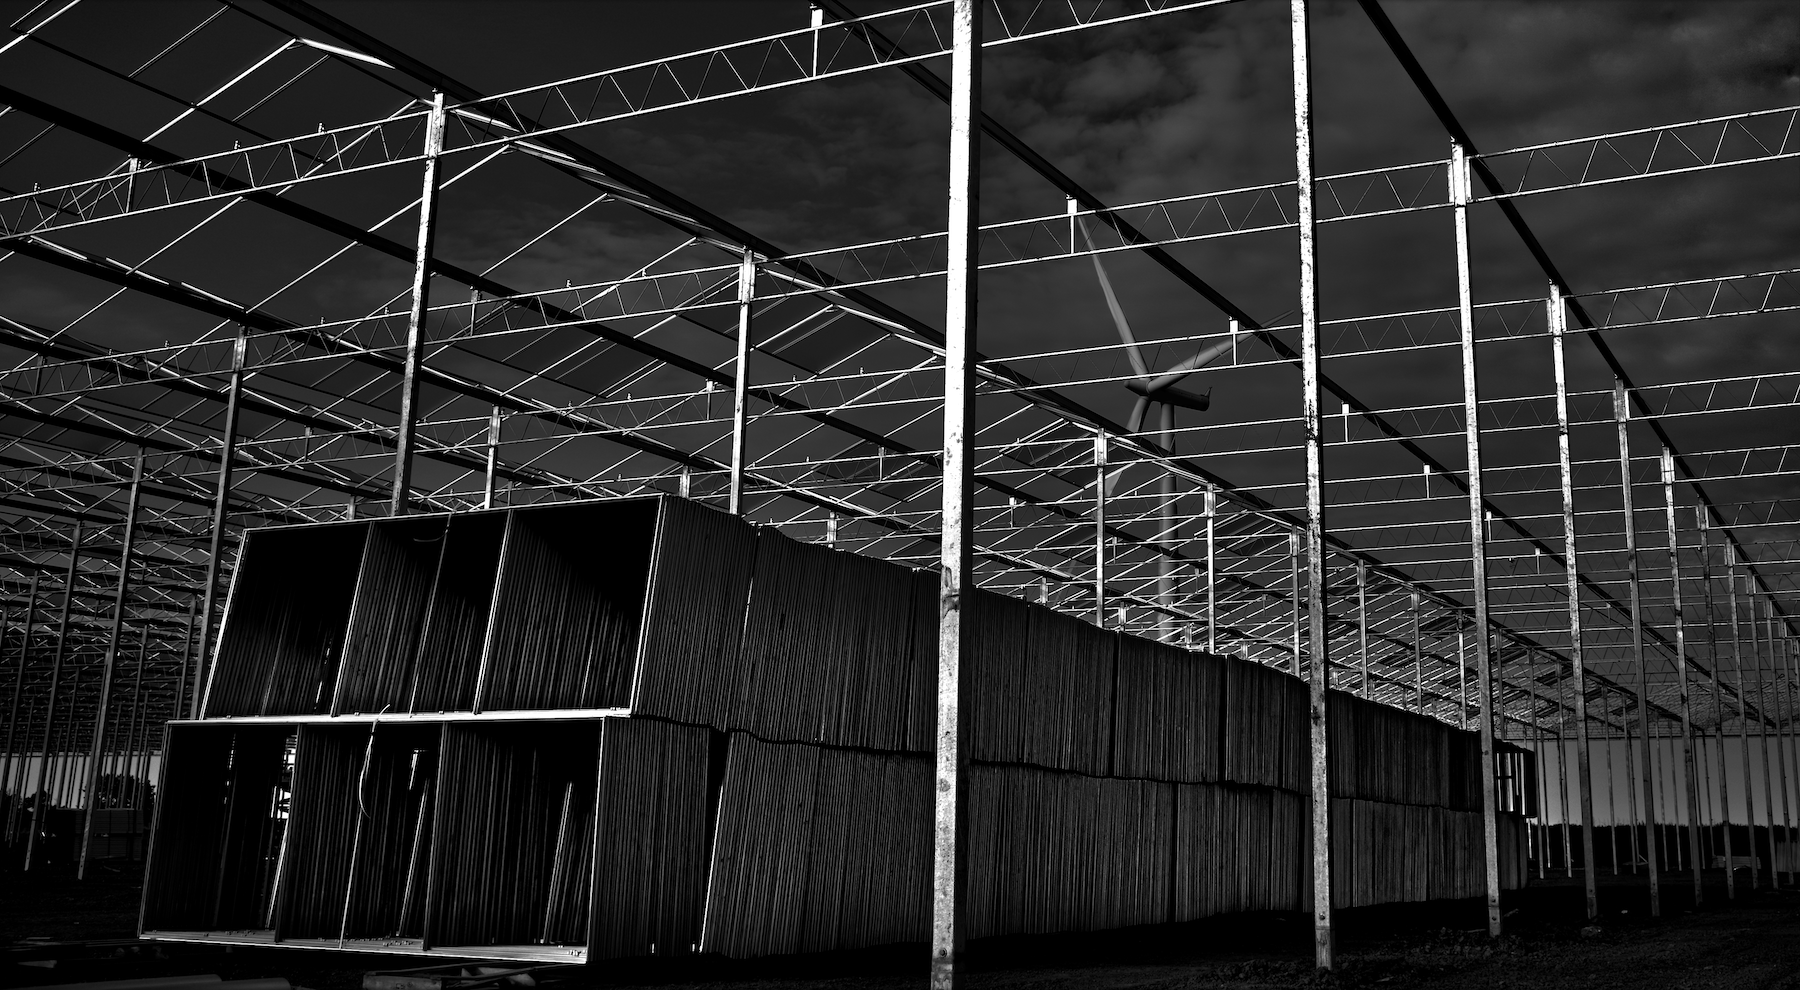 a black and white photography showing the metal framework of a greenhouse under construction